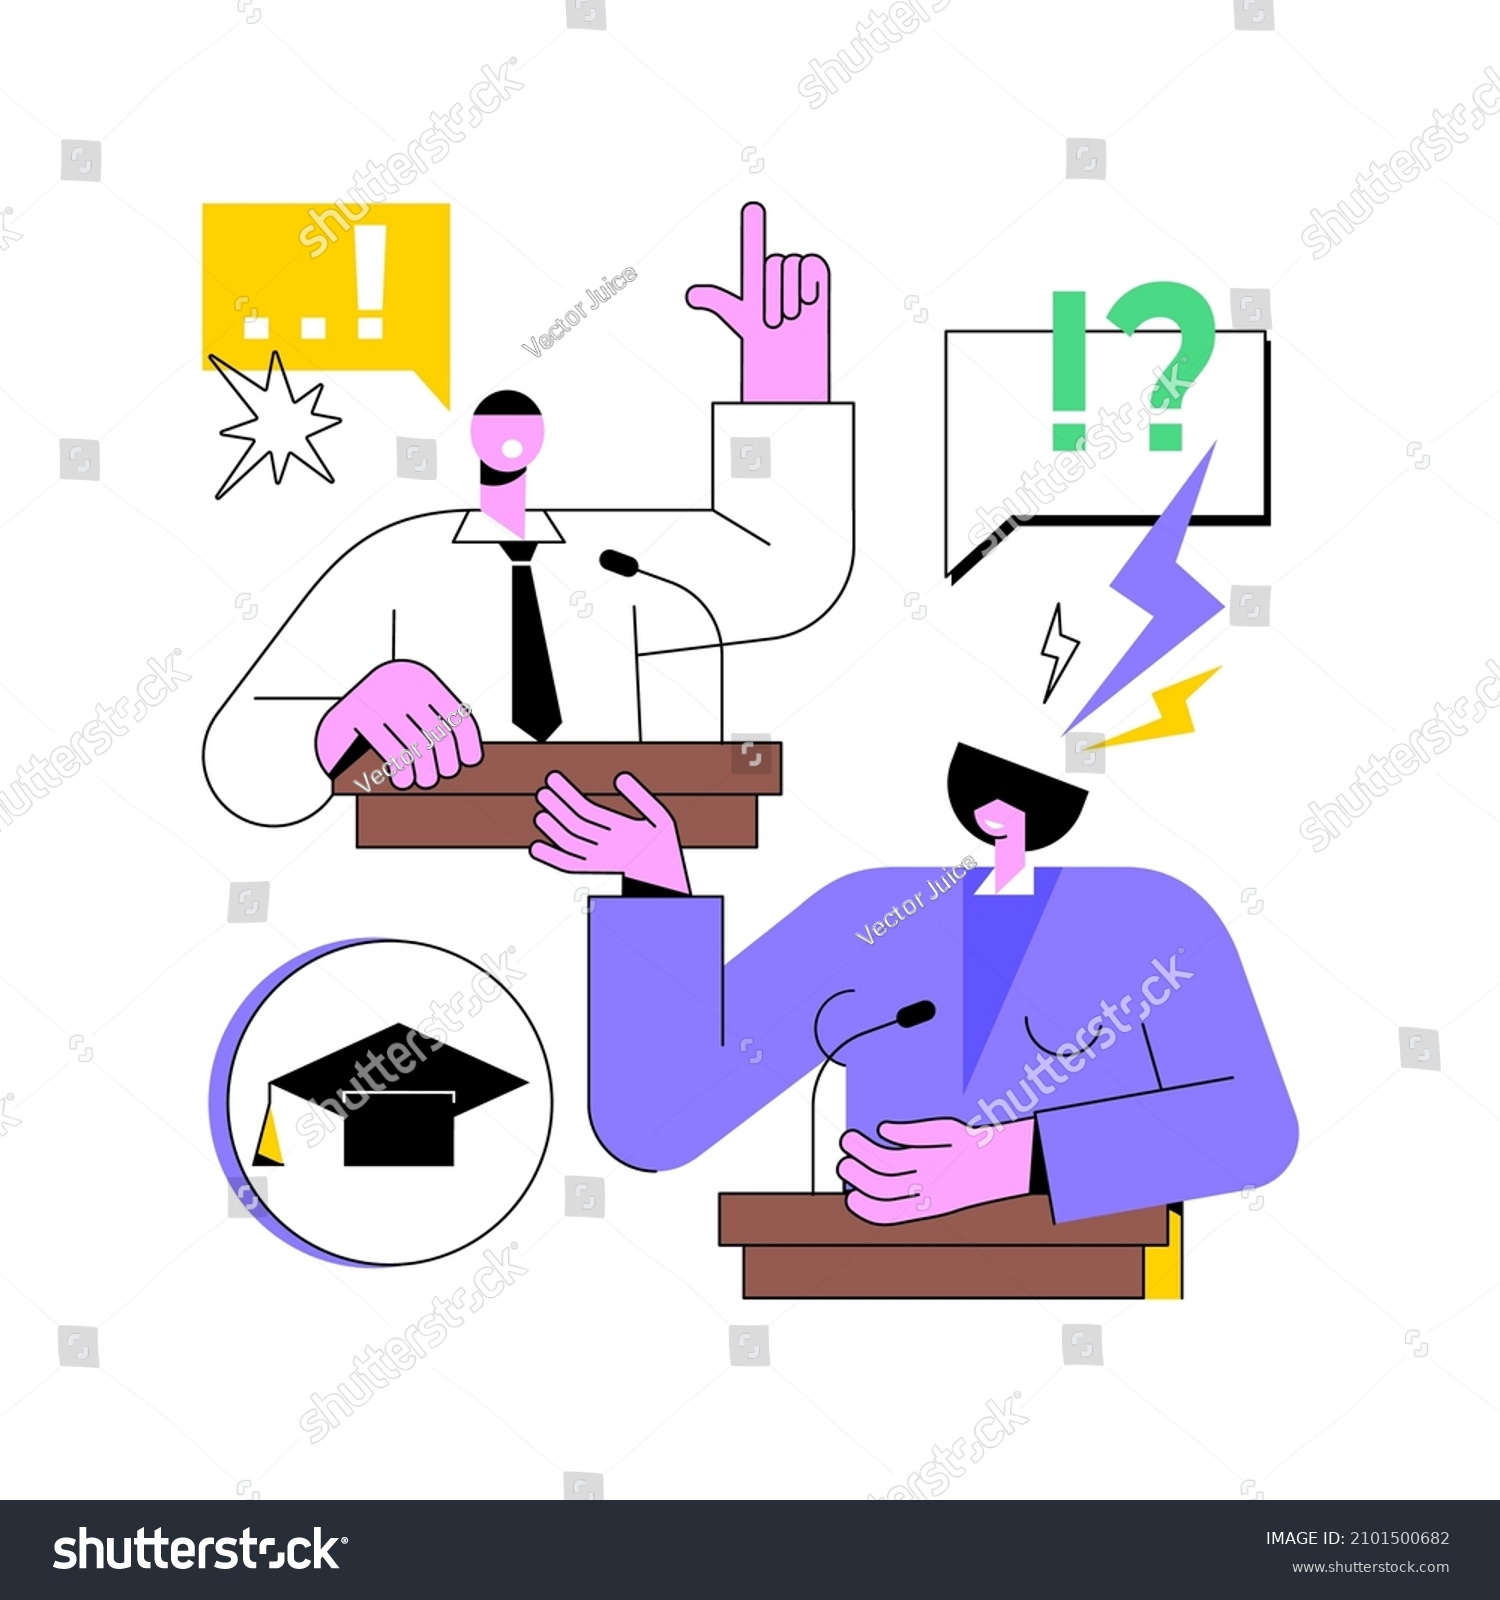 SVG of Debating club abstract concept vector illustration. Classroom debates, eloquent speech, debating competition, school club, public speaking class, effective communication skill abstract metaphor. svg